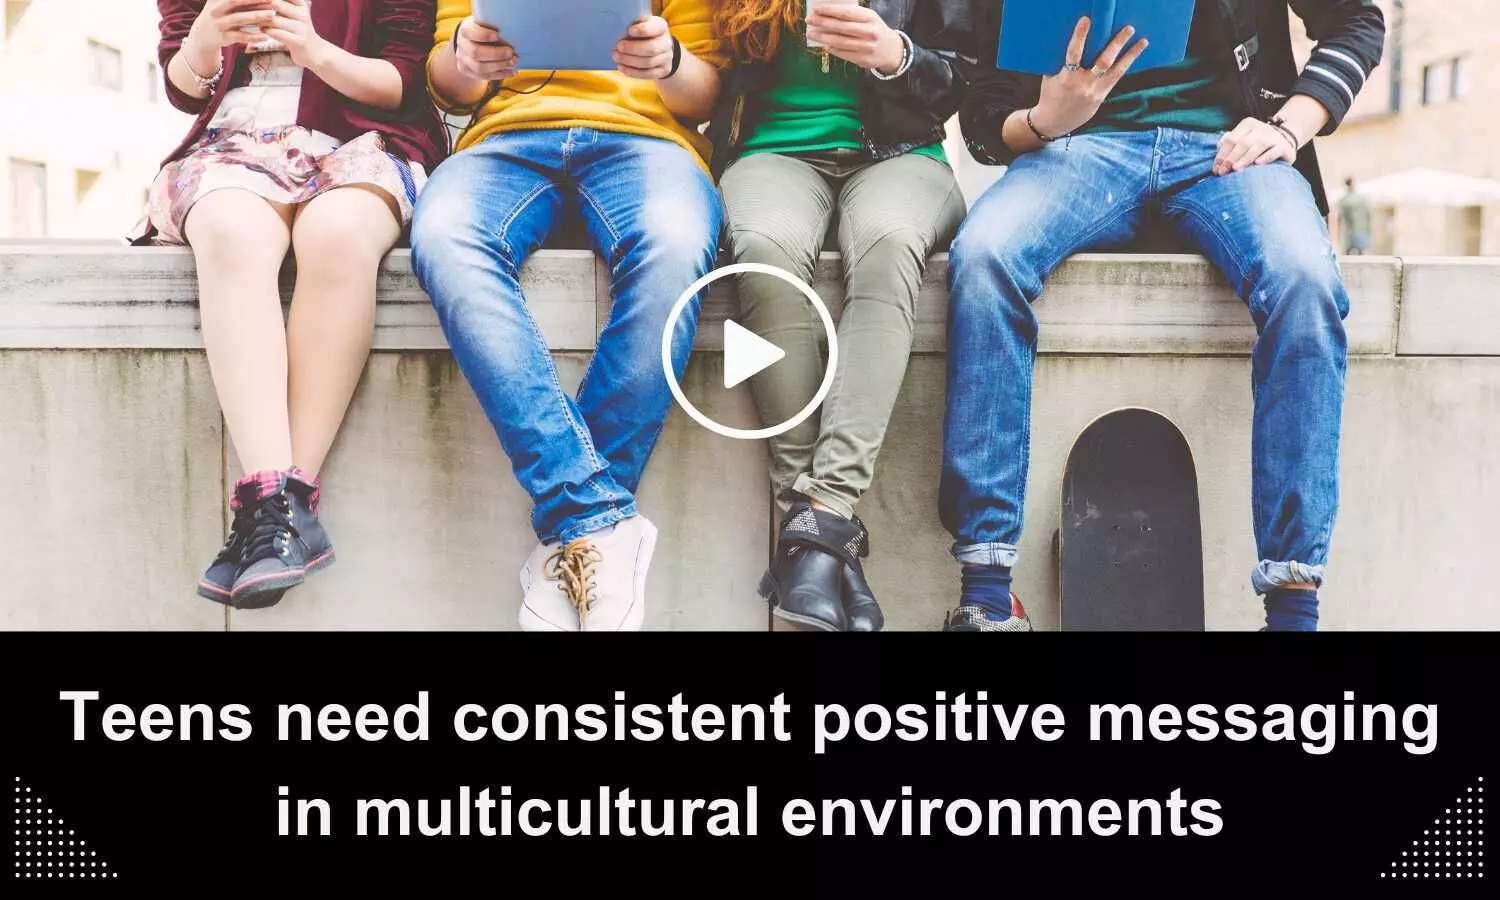 Teens need consistent positive messaging in multicultural environments